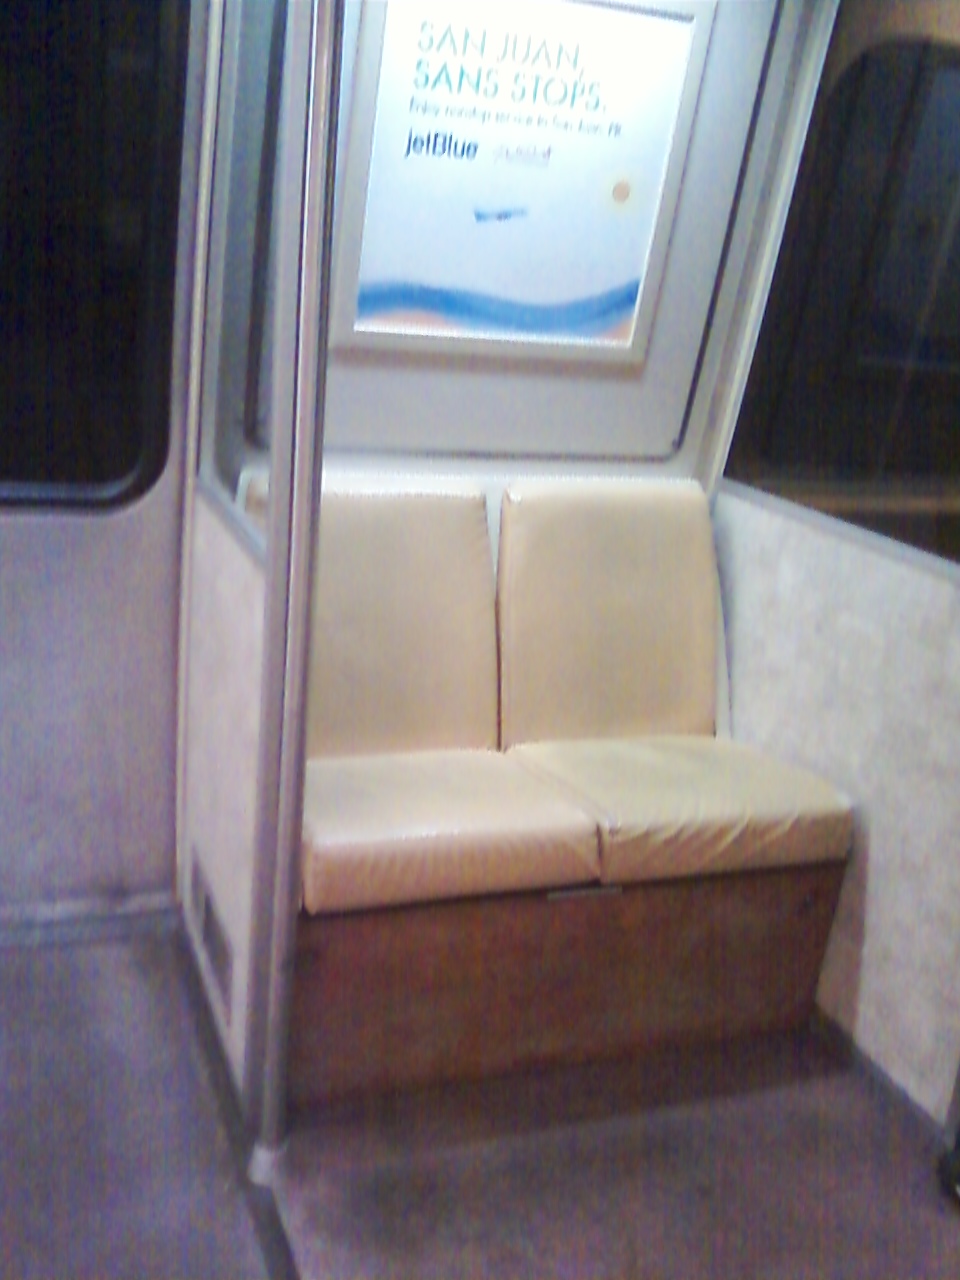 WMATA/DC Metro 2-seat set-aside section of car 1183; note that the 
two seat sections (one on each side of the car immediately adjacent to the
motorman's cab) are protected from outdoor weather and elements, as well
as the rest of the car body, but plastic dividers. For further details,
please visit www.wirelessnotes.org.